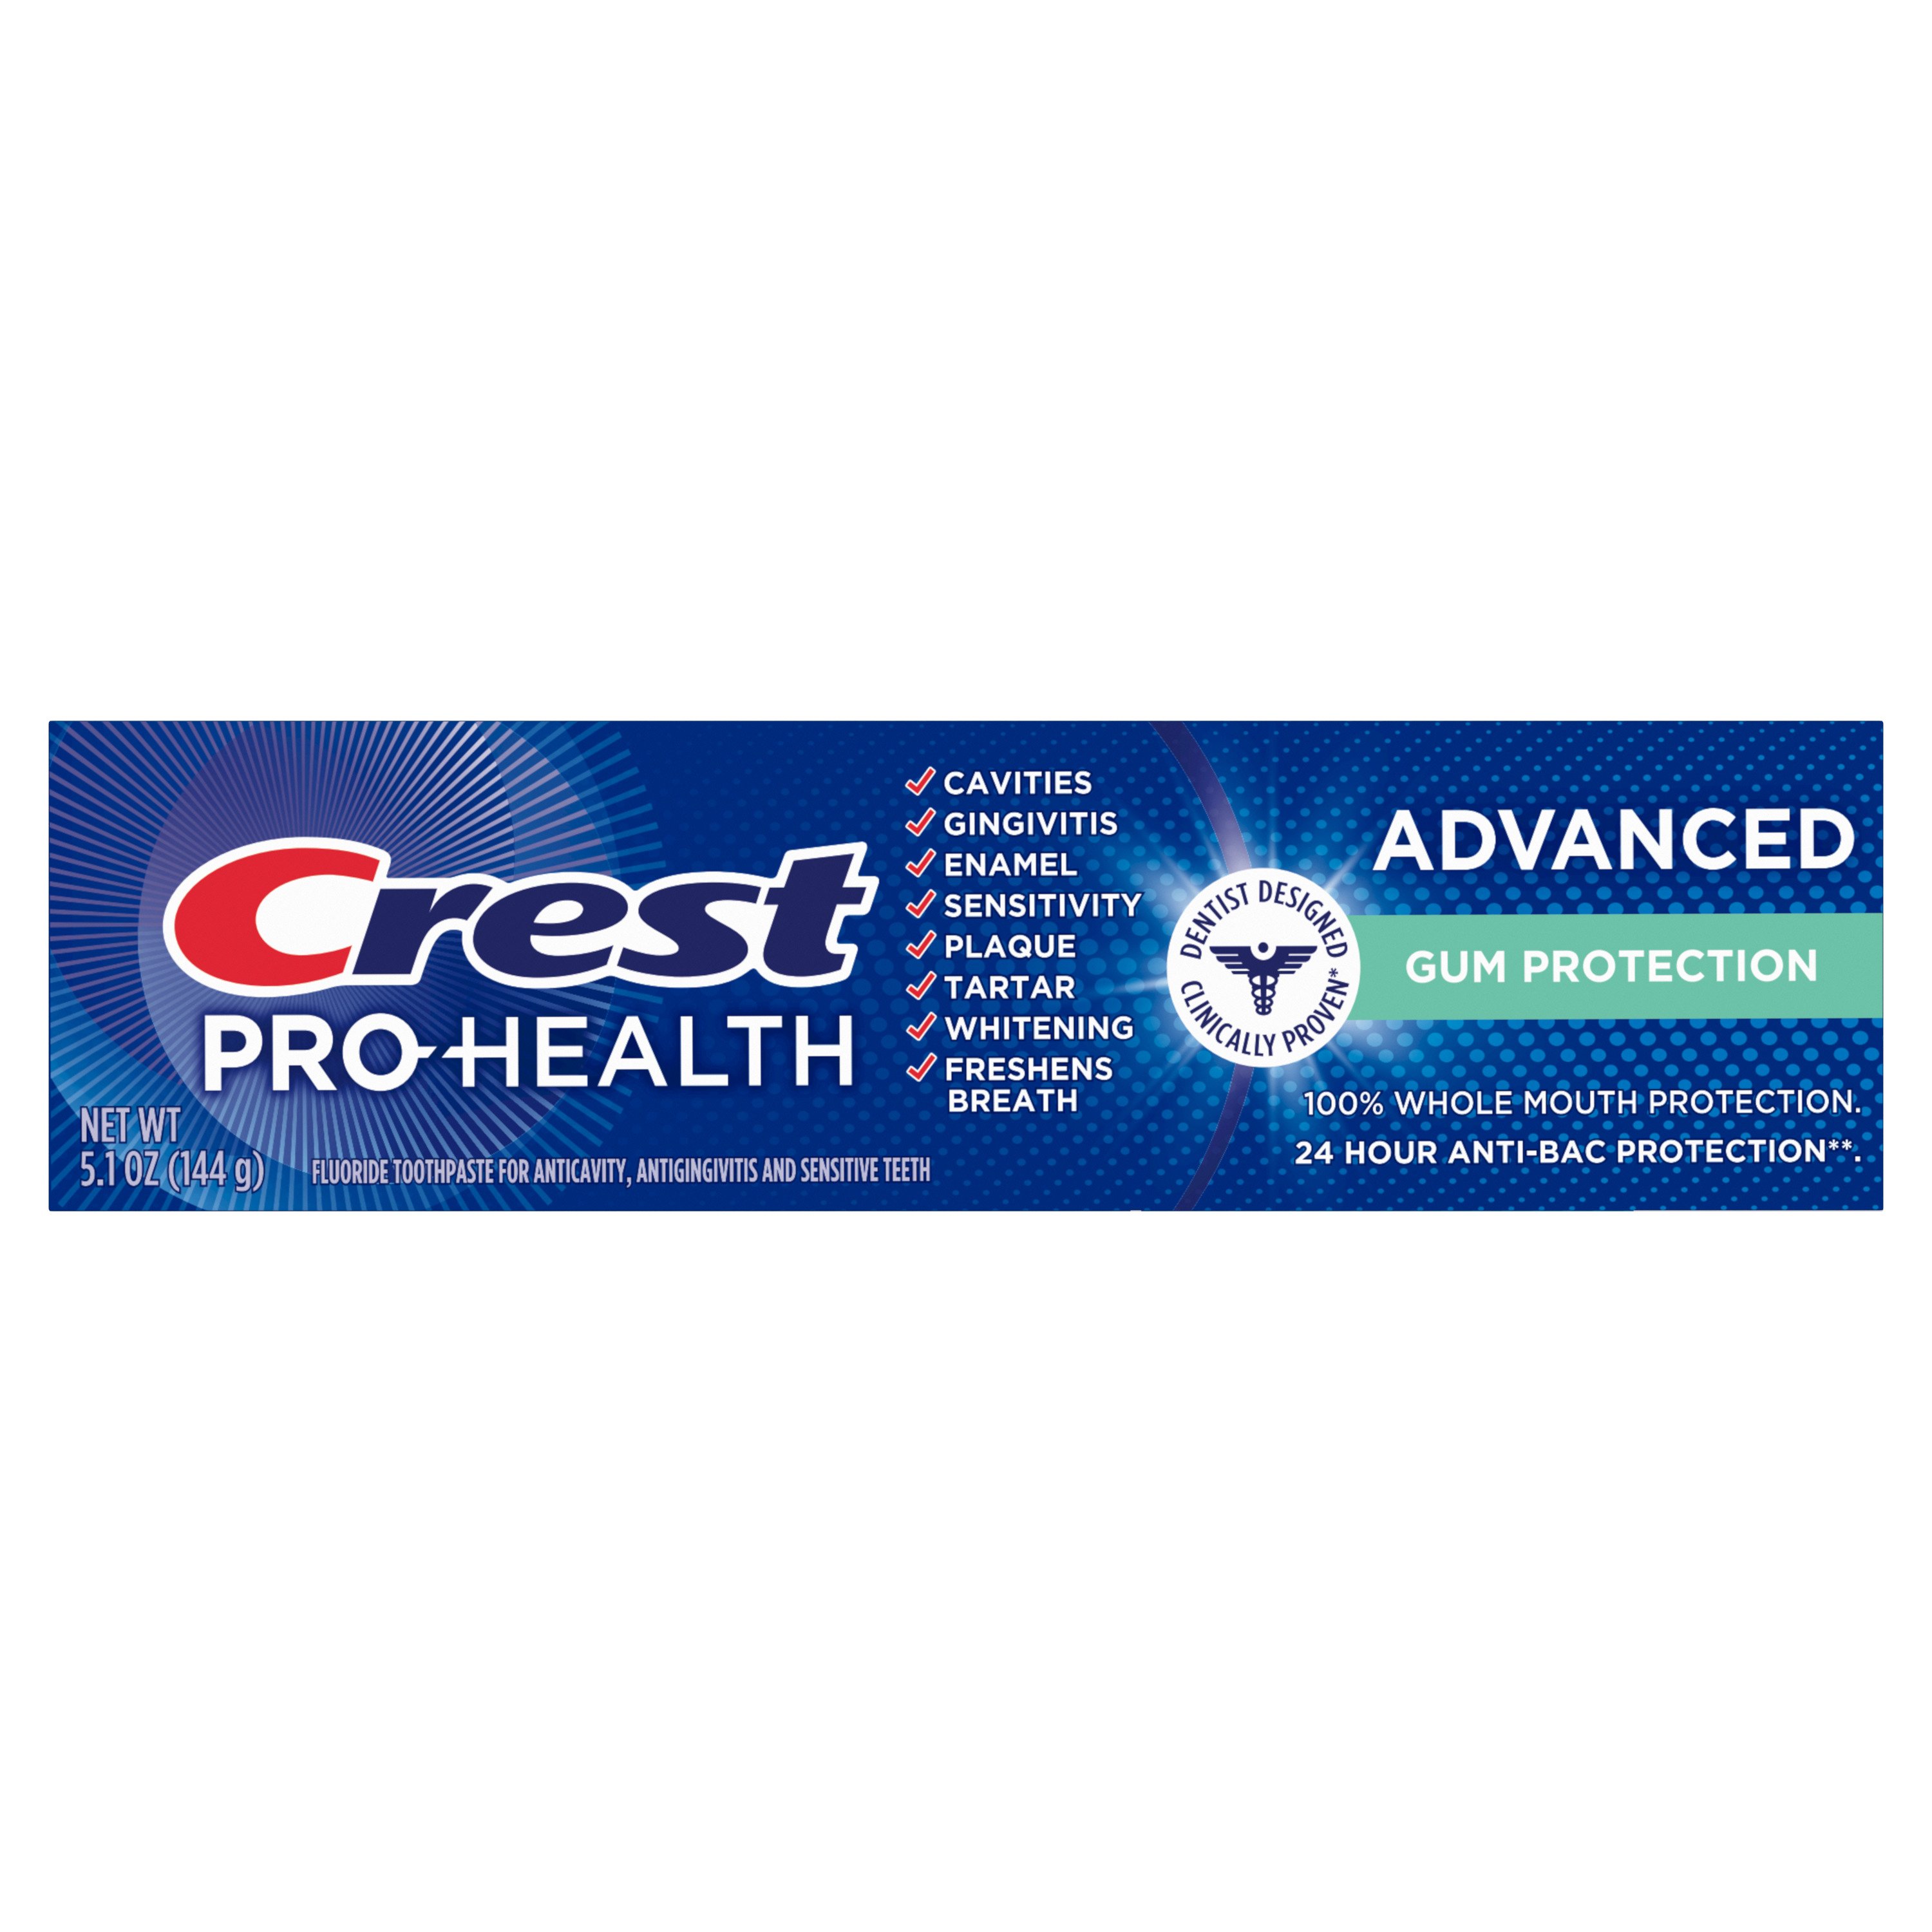 Crest Pro Health Advanced Gum Protection Toothpaste Shop Toothpaste